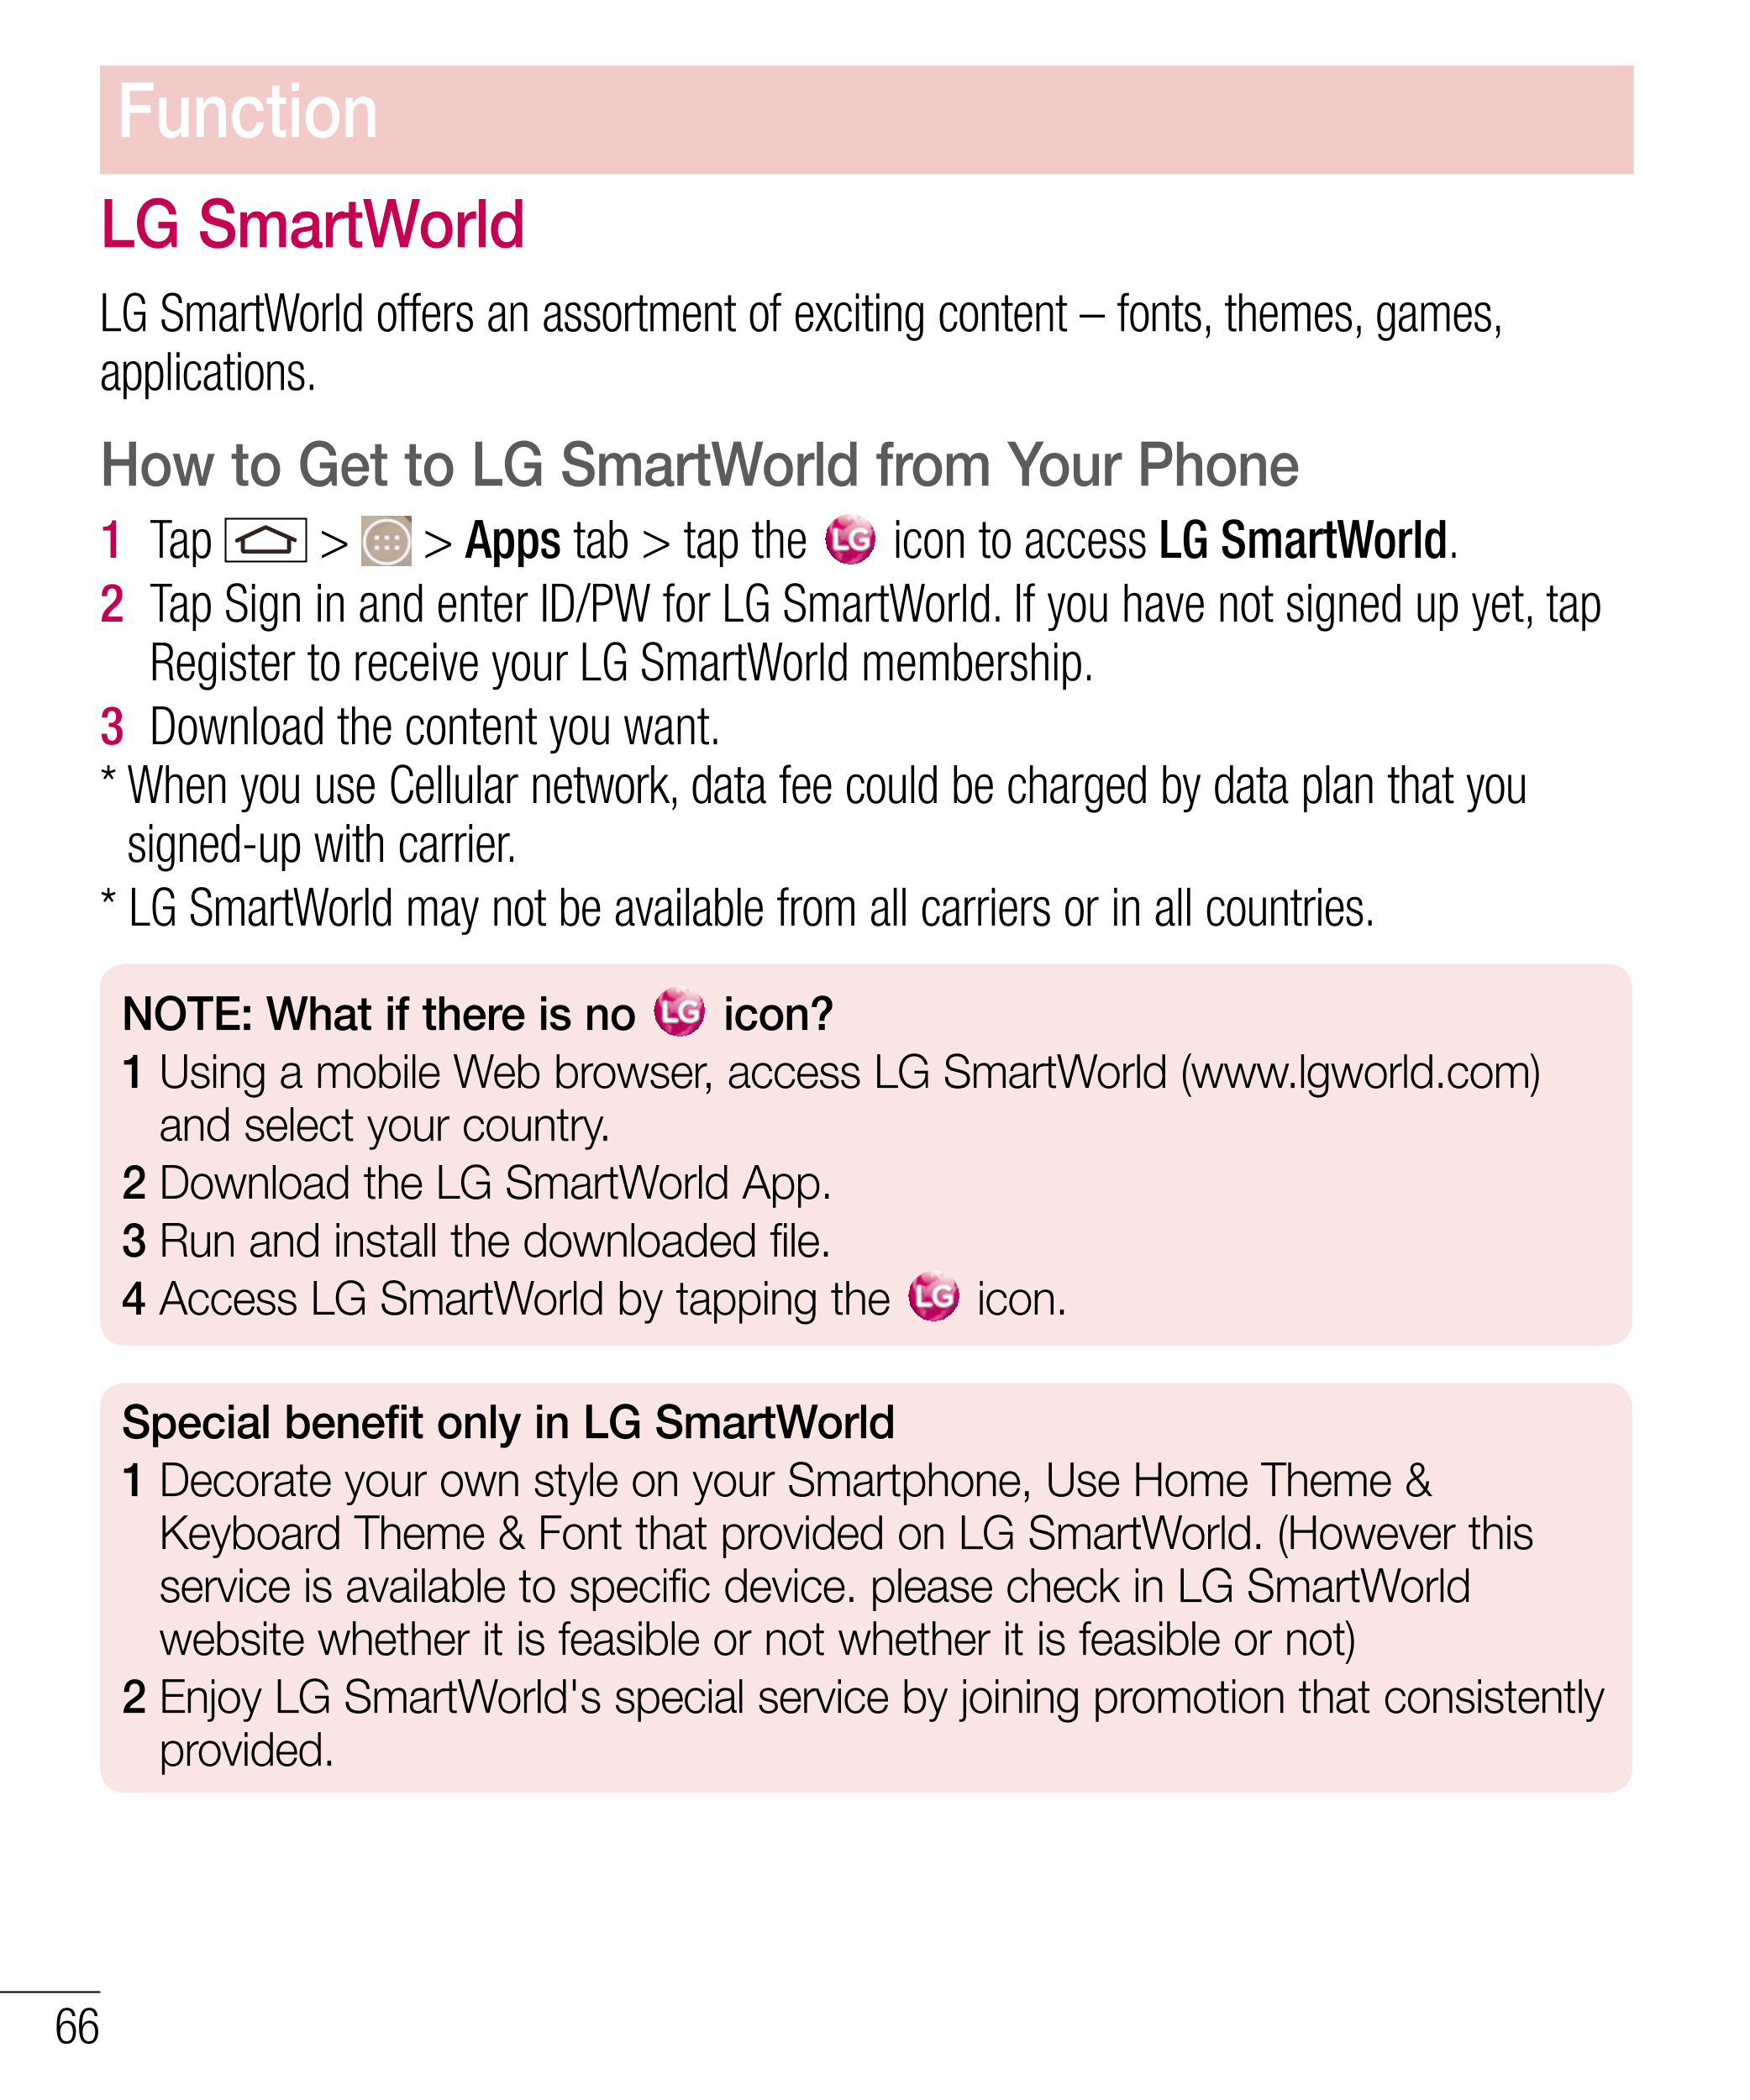 Function
LG SmartWorld
LG SmartWorld offers an assortment of exciting content – fonts, themes, games, 
applications.
How to Get 